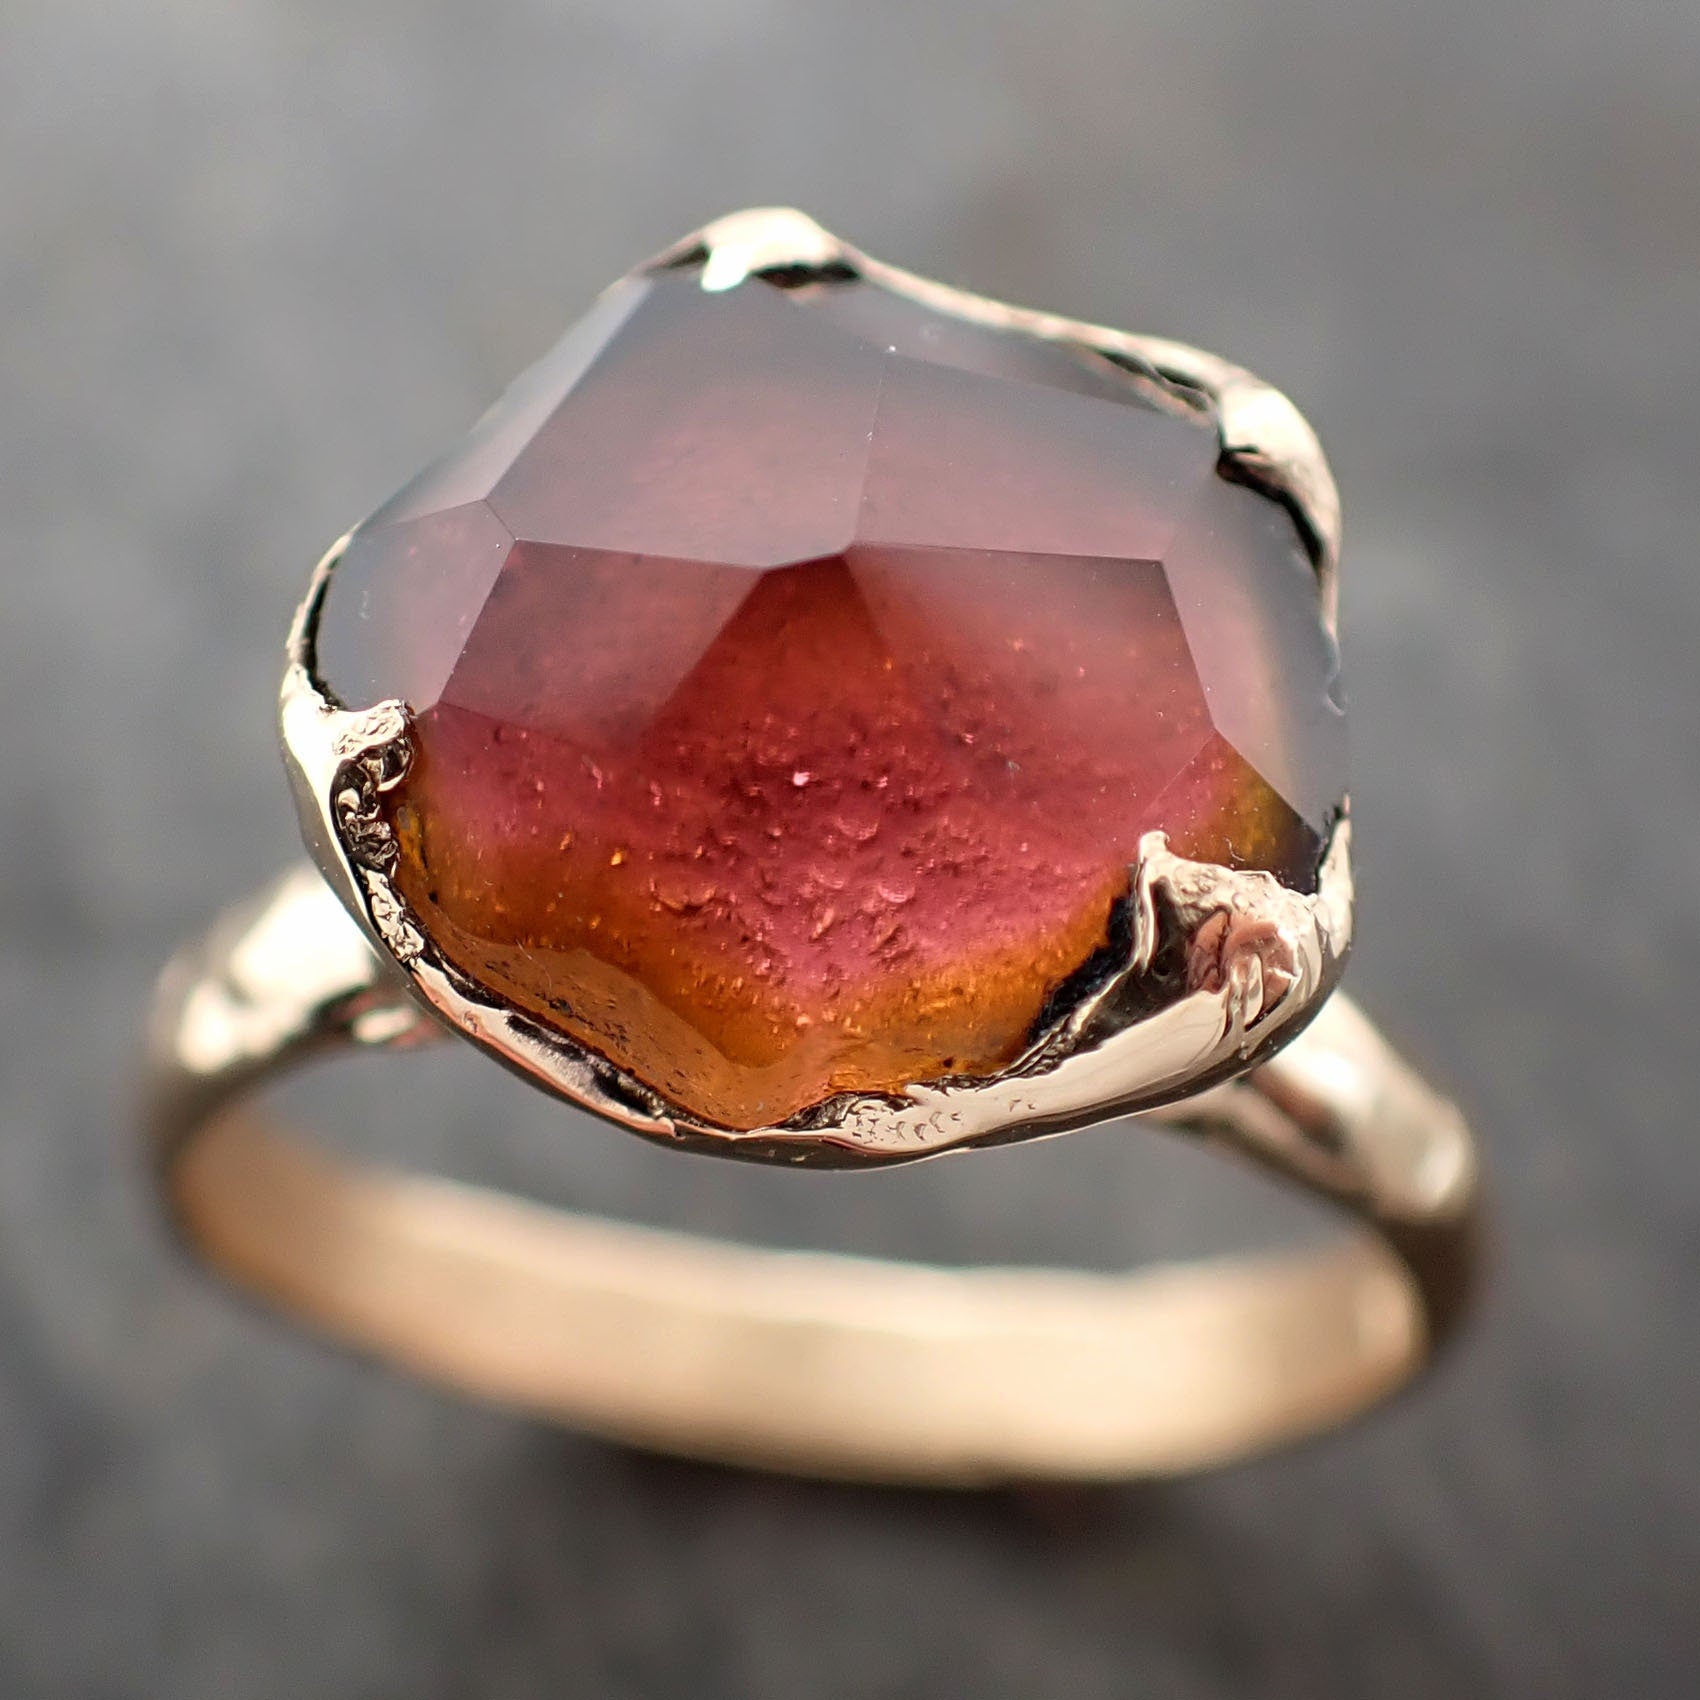 925 Watermelon Tourmaline Rough Gemstone Silver Ring, Weight: 2.8 Gm at Rs  1800 in Jaipur